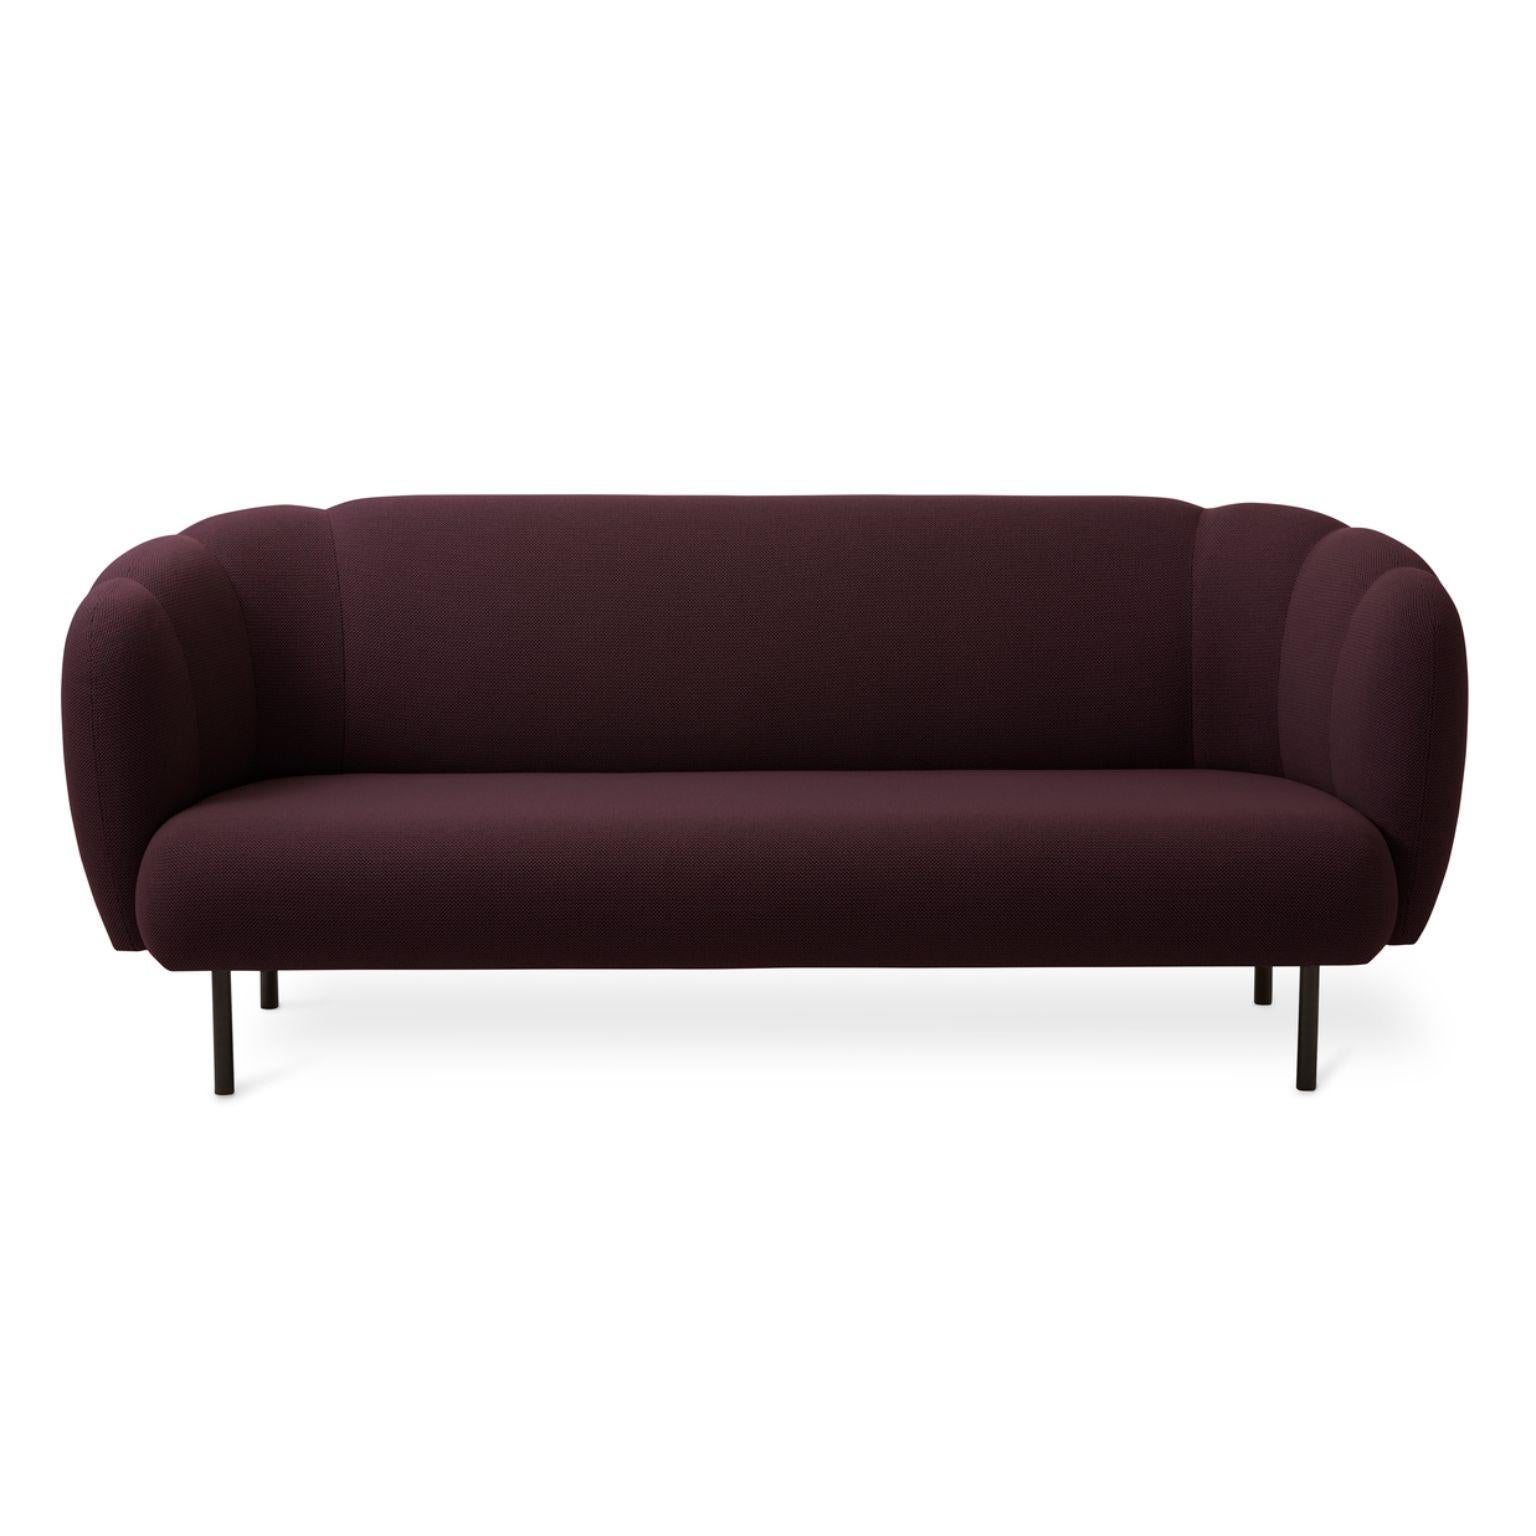 Caper 3 Seater With Stitches Burgundy by Warm Nordic
Dimensions: D200 x W84 x H 80 cm
Material: Textile upholstery, Wooden frame, Powder coated black steel legs.
Weight: 55.5 kg
Also available in different colours and finishes. Please contact